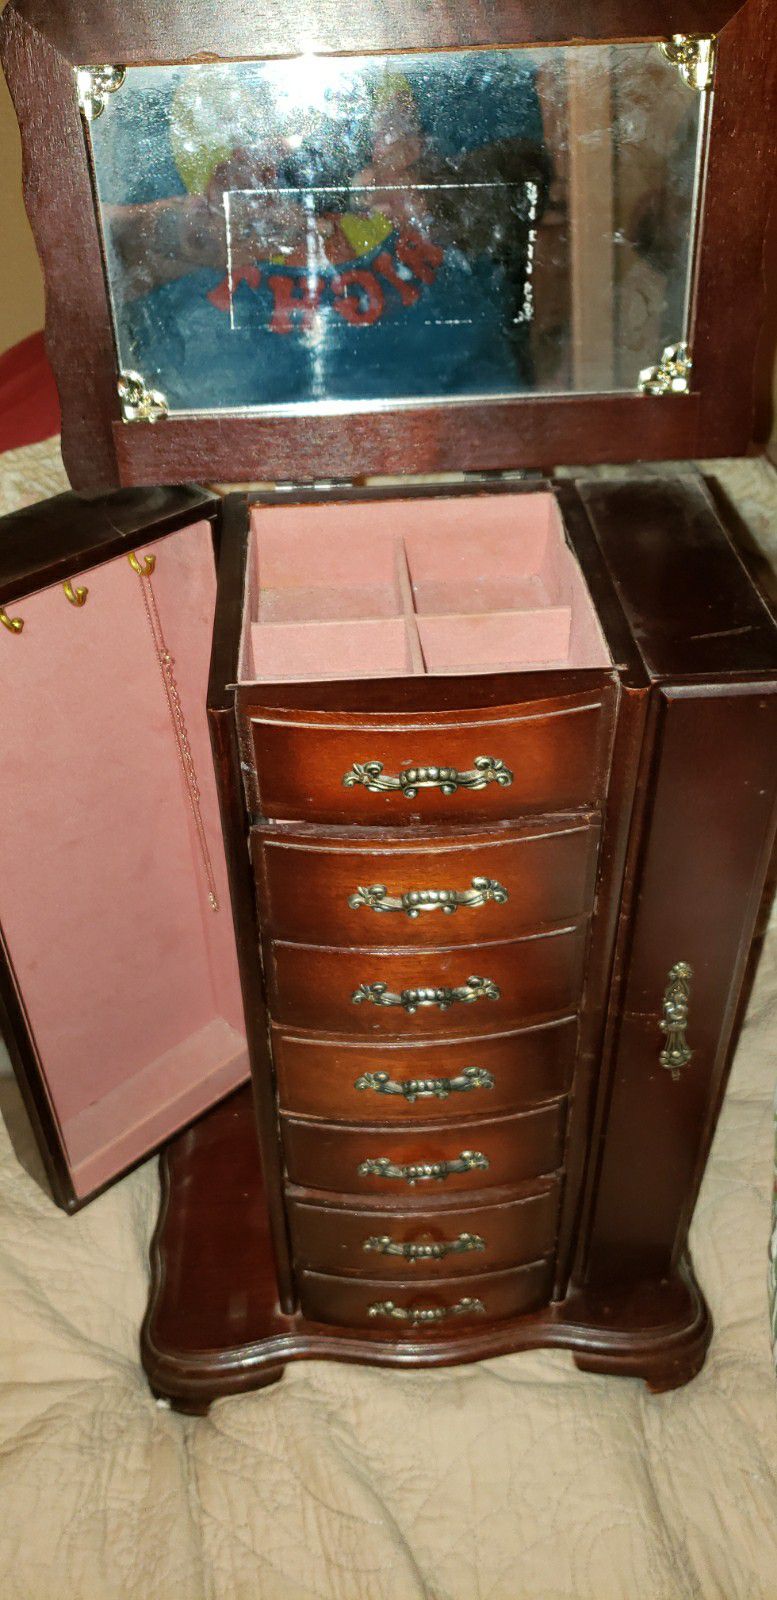 Jewelry box and accessories